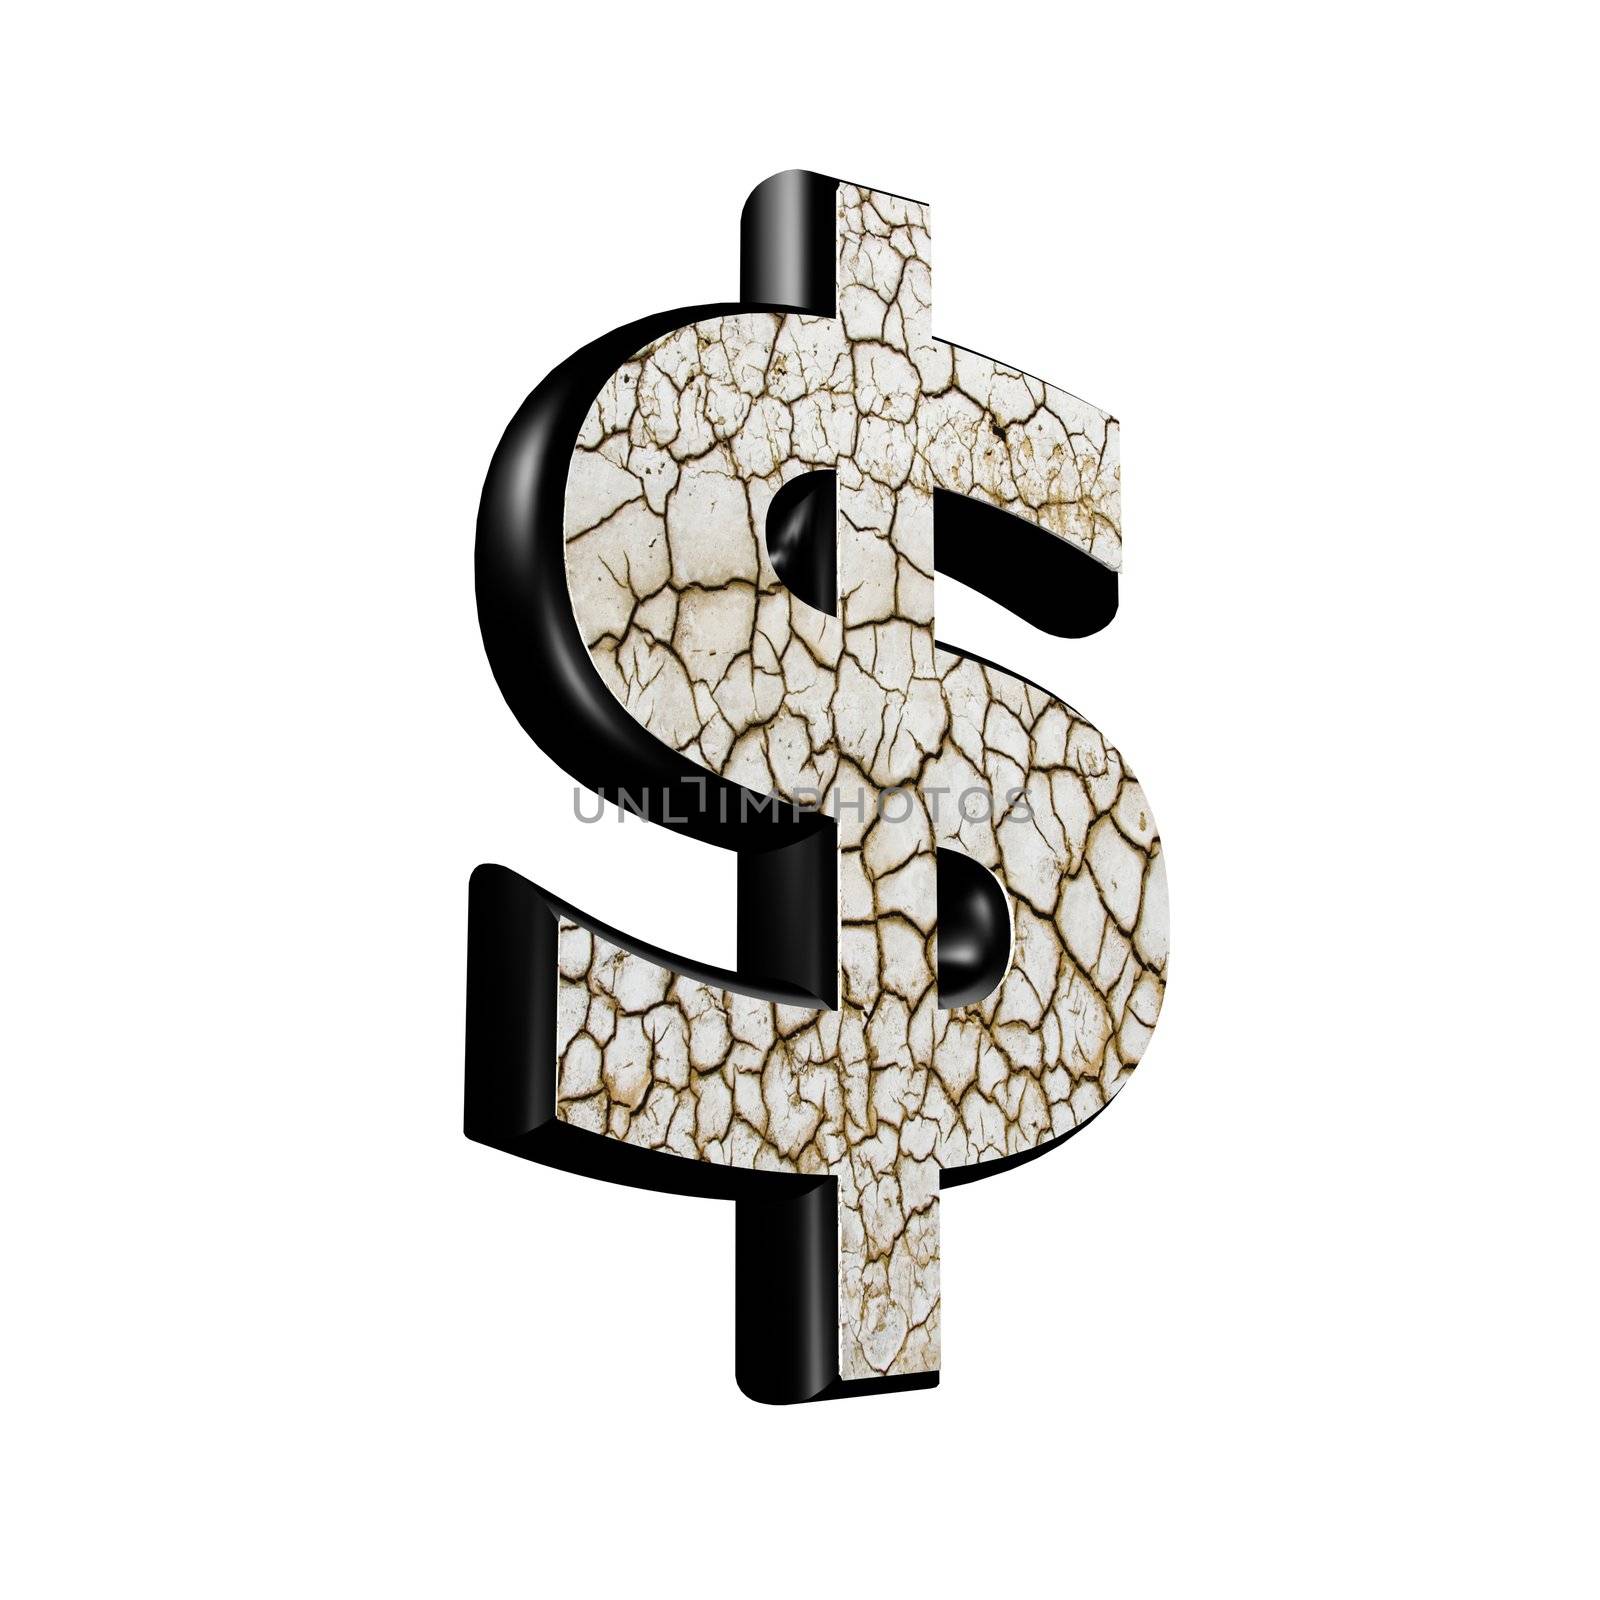 abstract 3d currency sign with dry ground texture - dollar curre by chrisroll